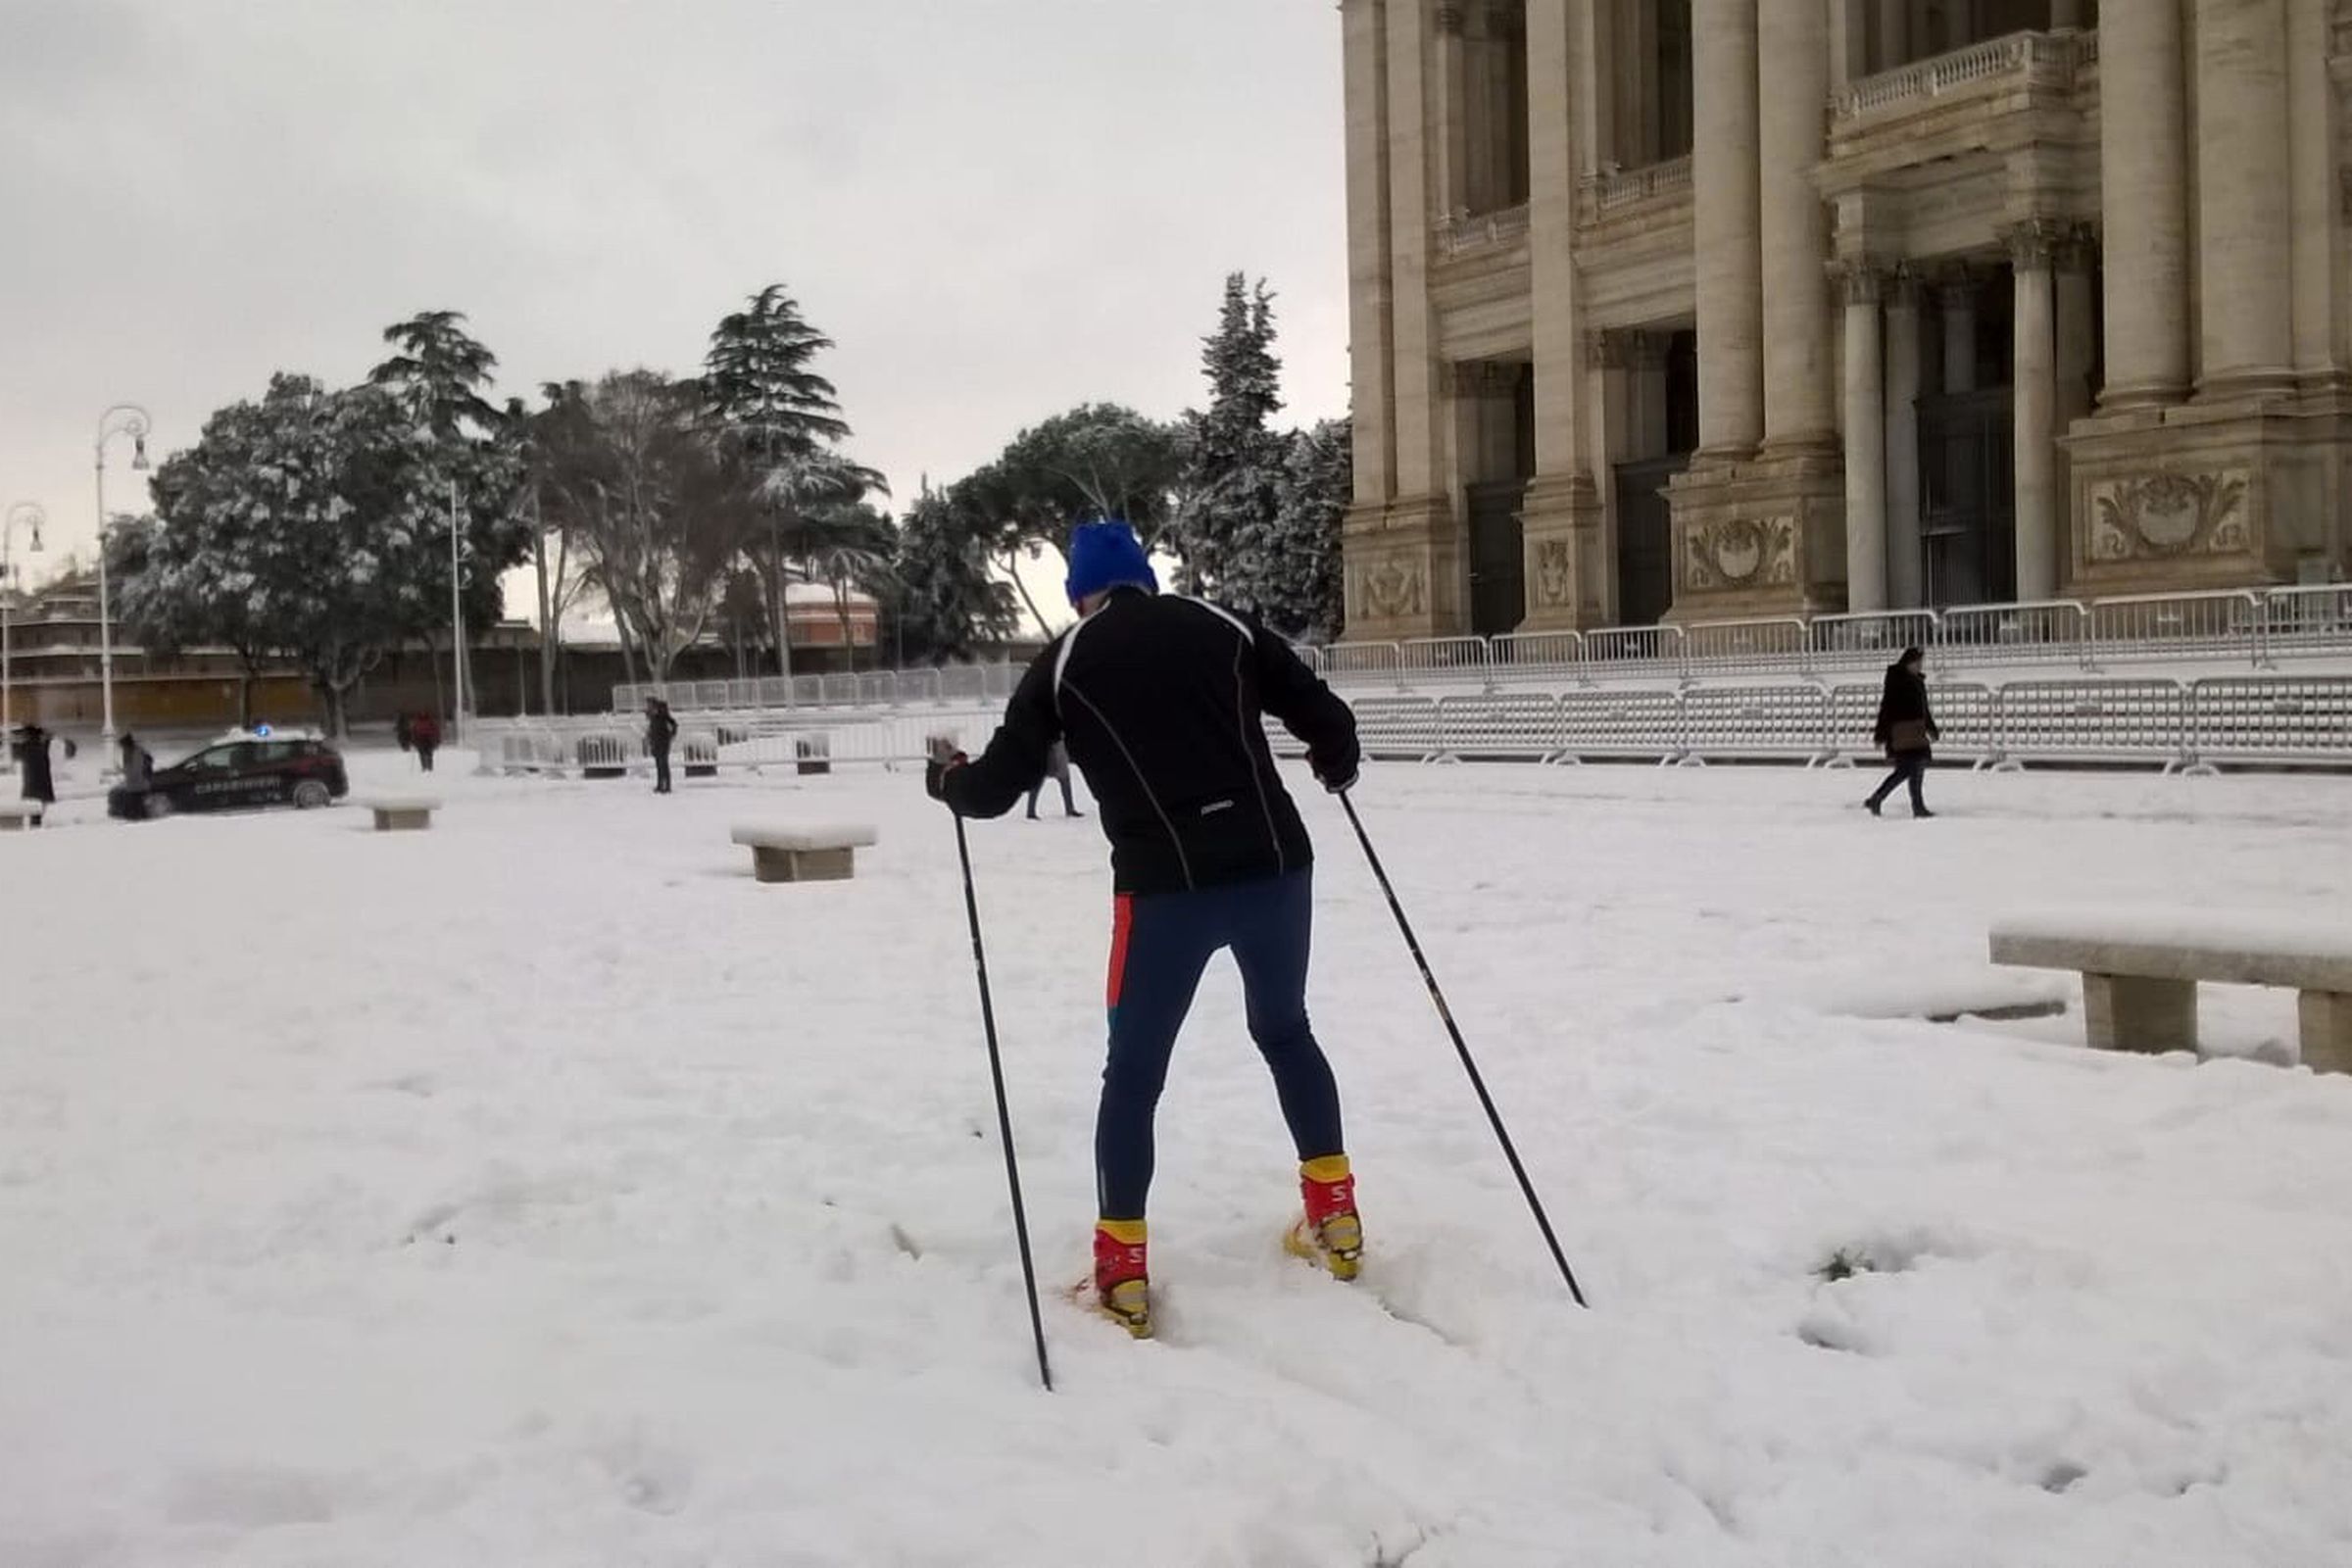 A skiier in front of the Basilica of St John Lateran in Rome.